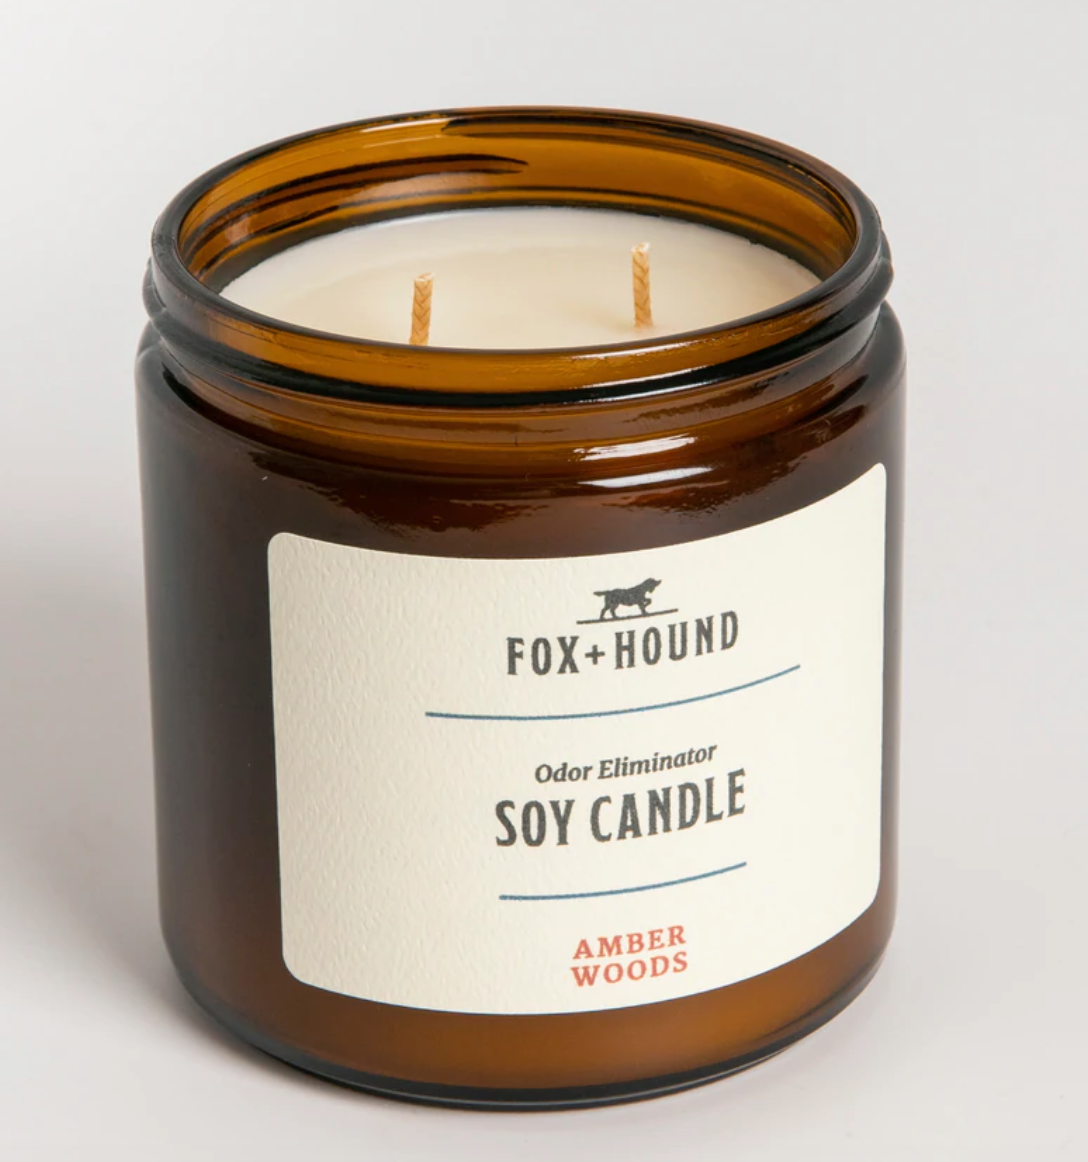 Fox + Hound Odour Eliminator Soy Candle - Amber Woods Scent